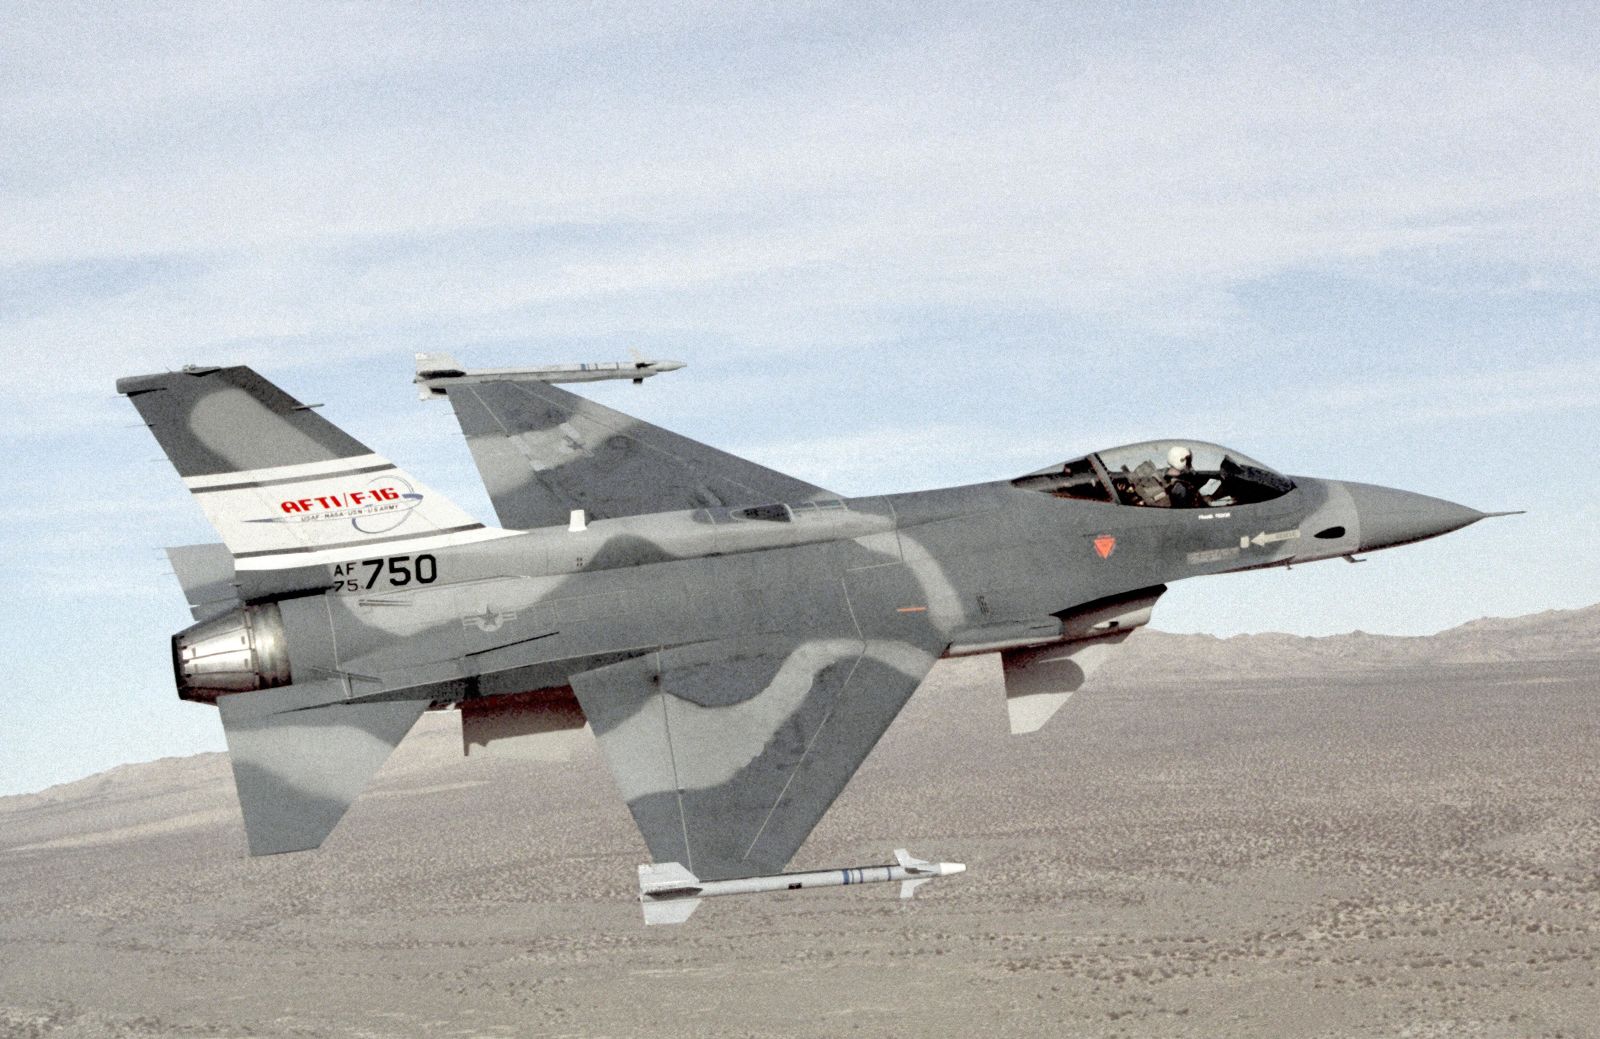 The F-16 AFTI in an early camouflage pattern